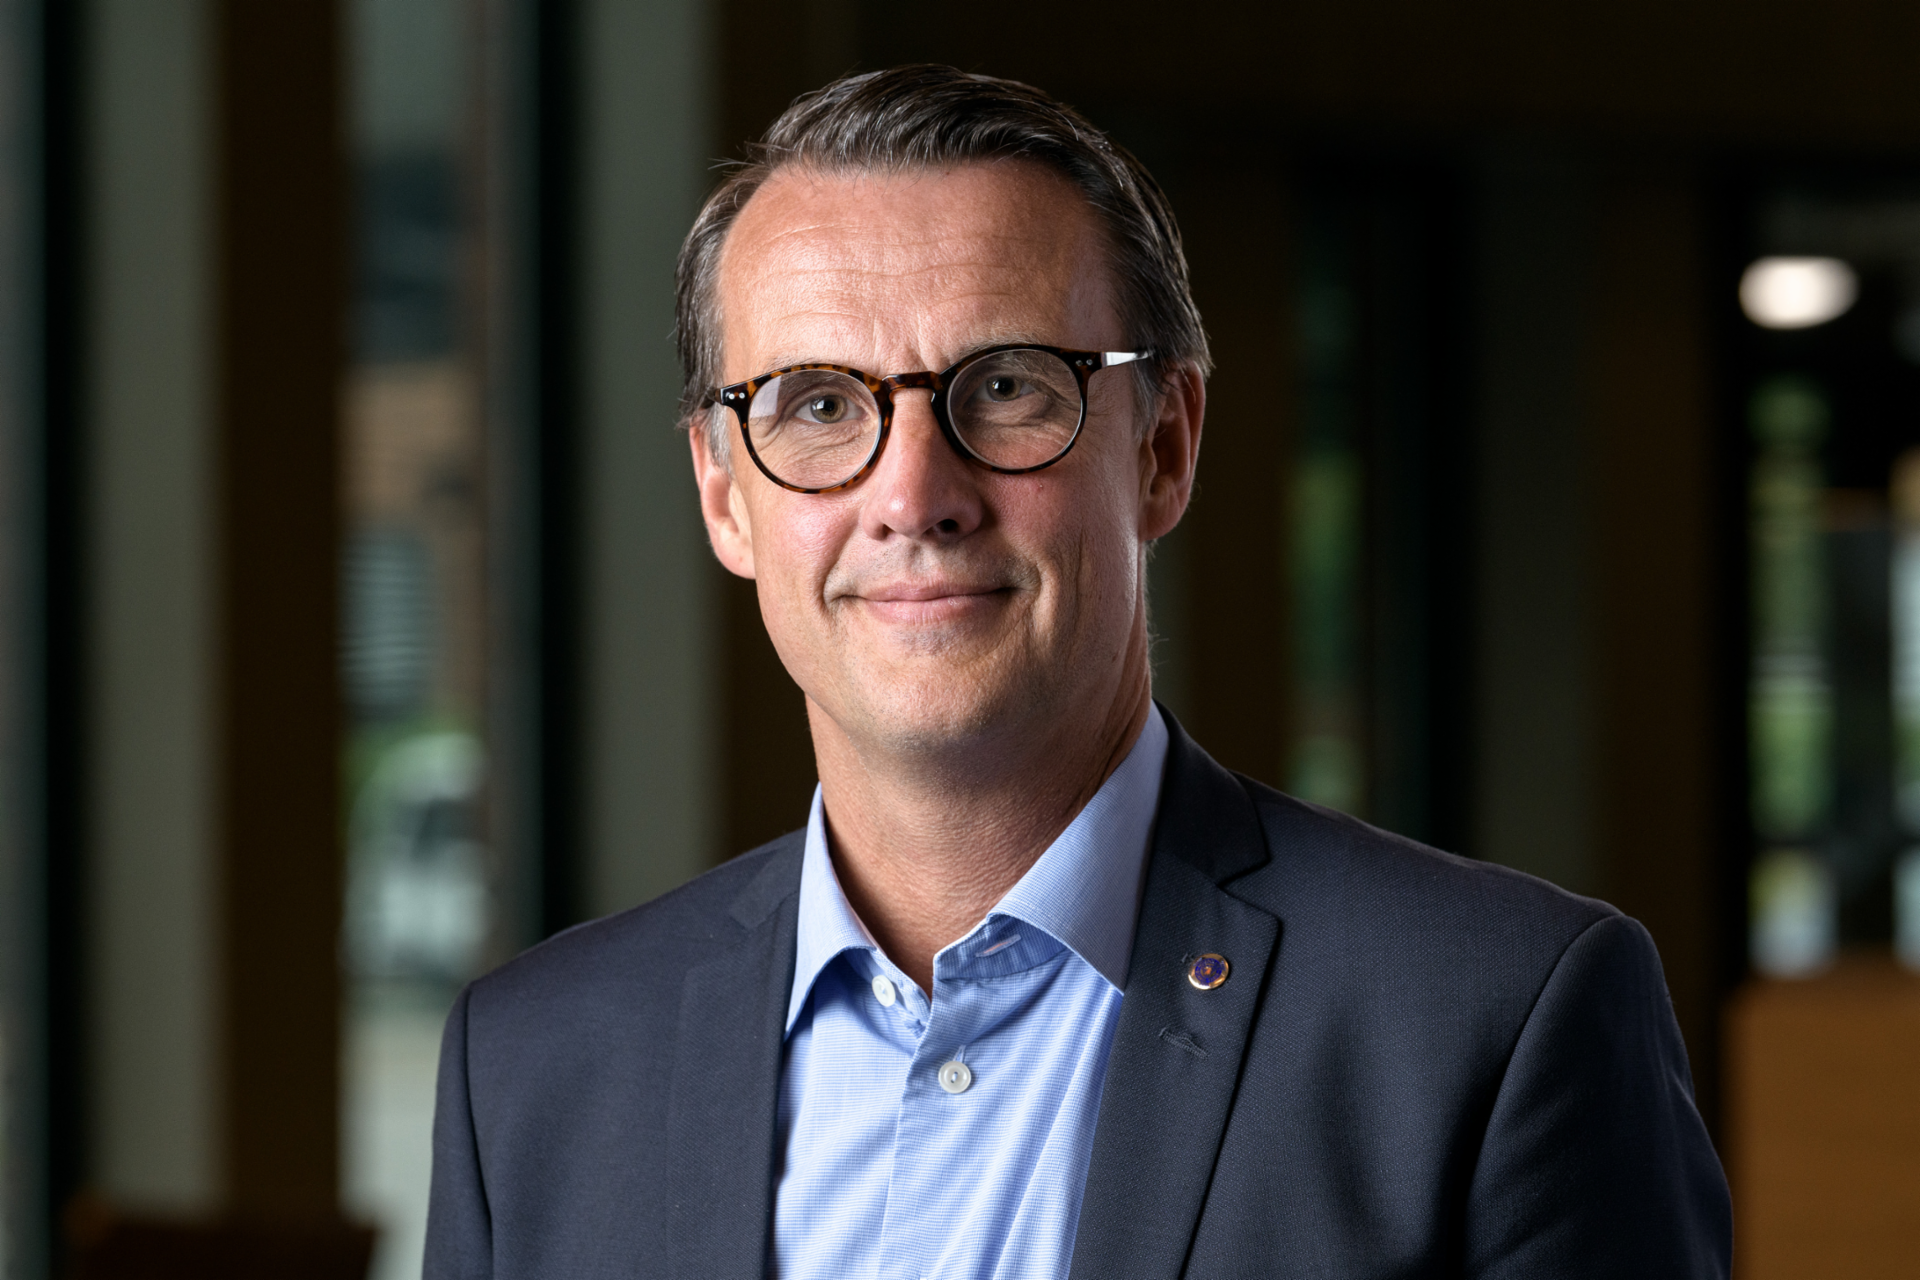 Senior Vice President and Head of e-Mobility at Scania